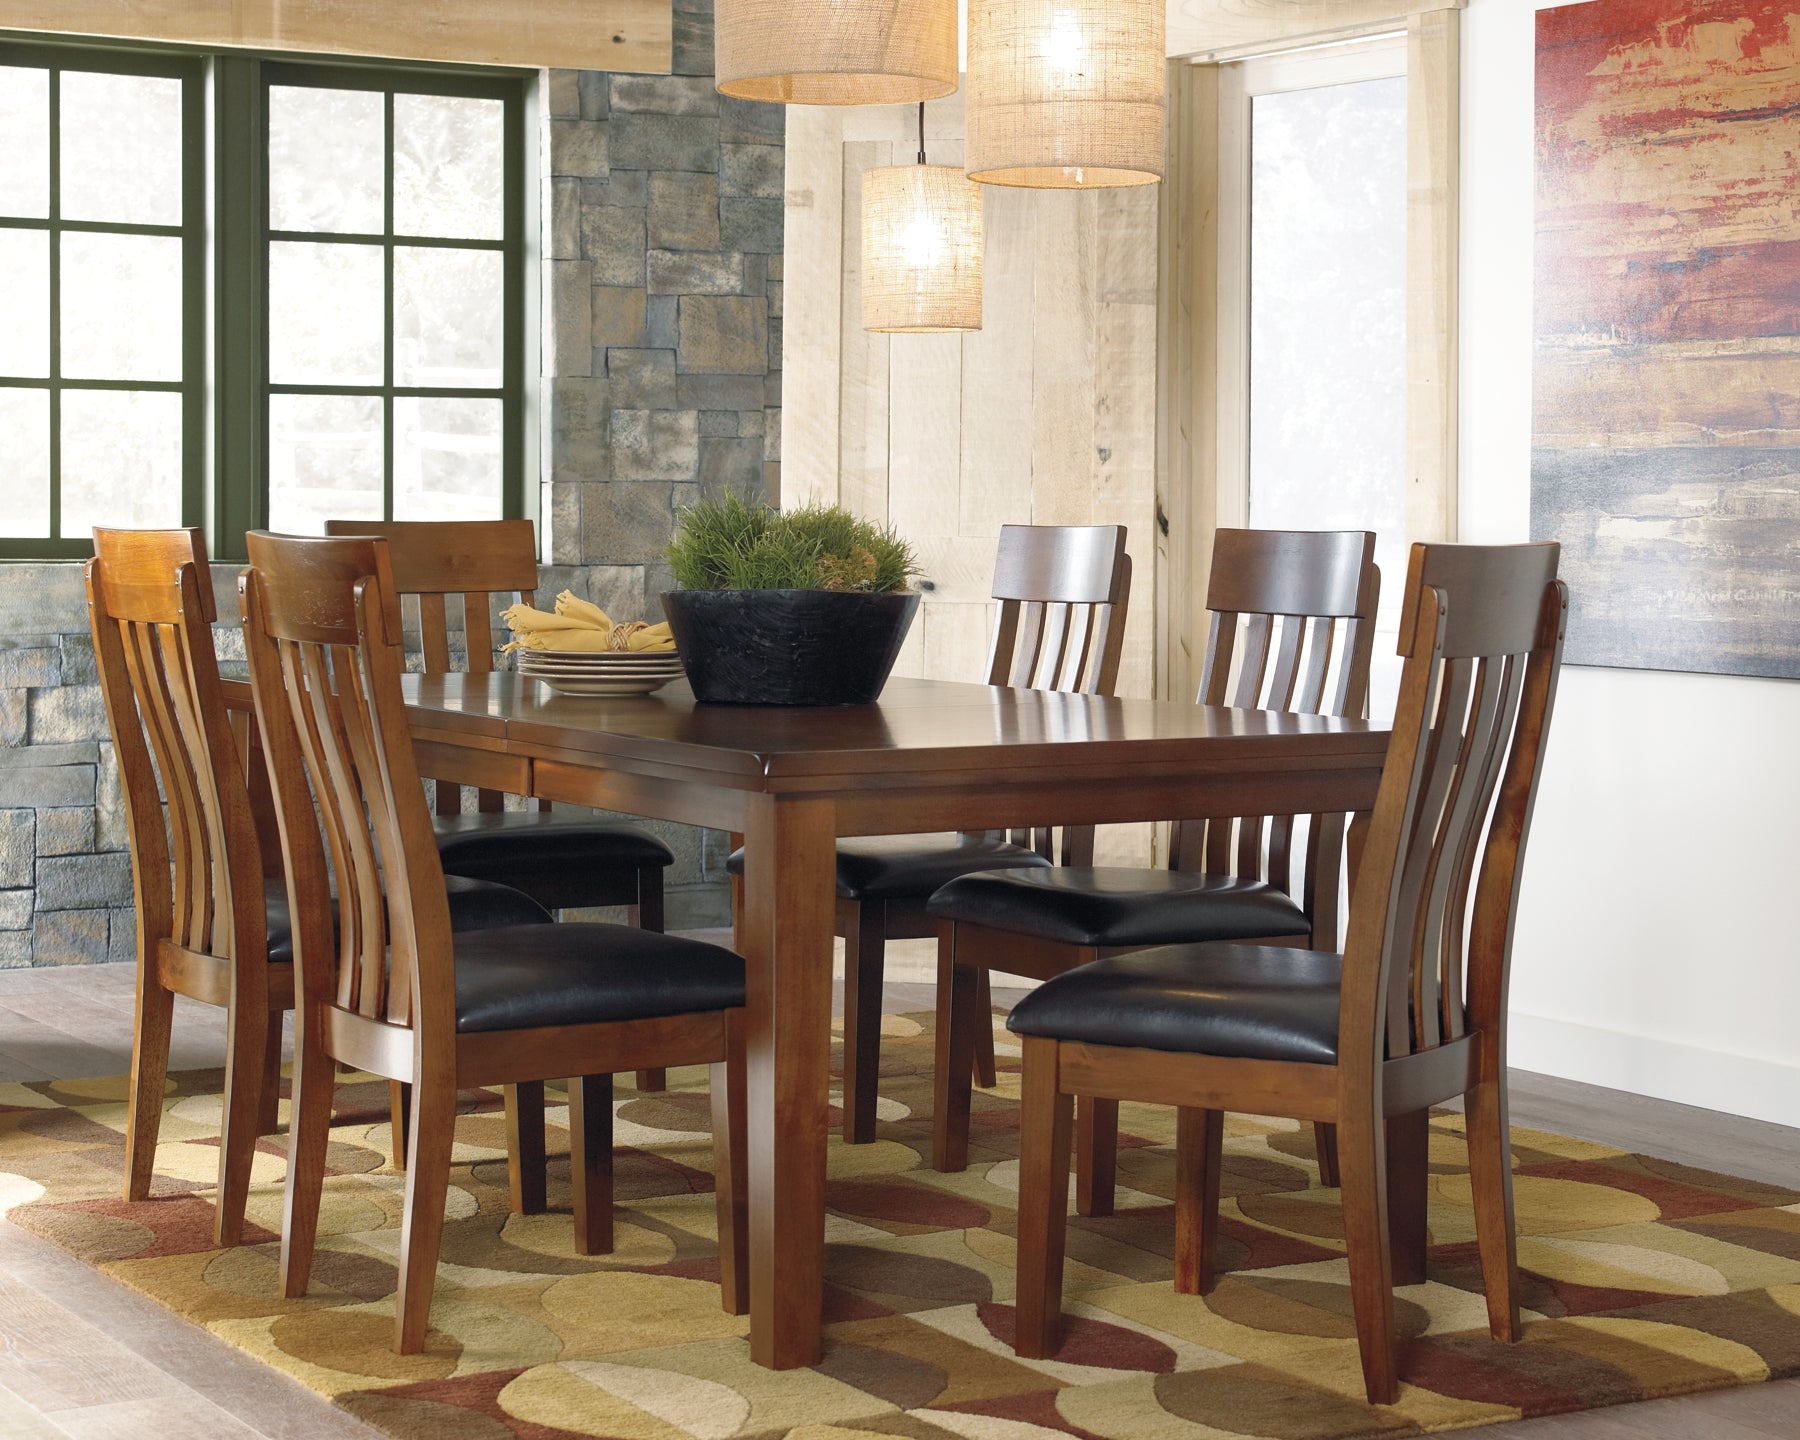 Ralene Dining Table and 8 Chairs Wilson Furniture (OH)  in Bridgeport, Ohio. Serving Bridgeport, Yorkville, Bellaire, & Avondale